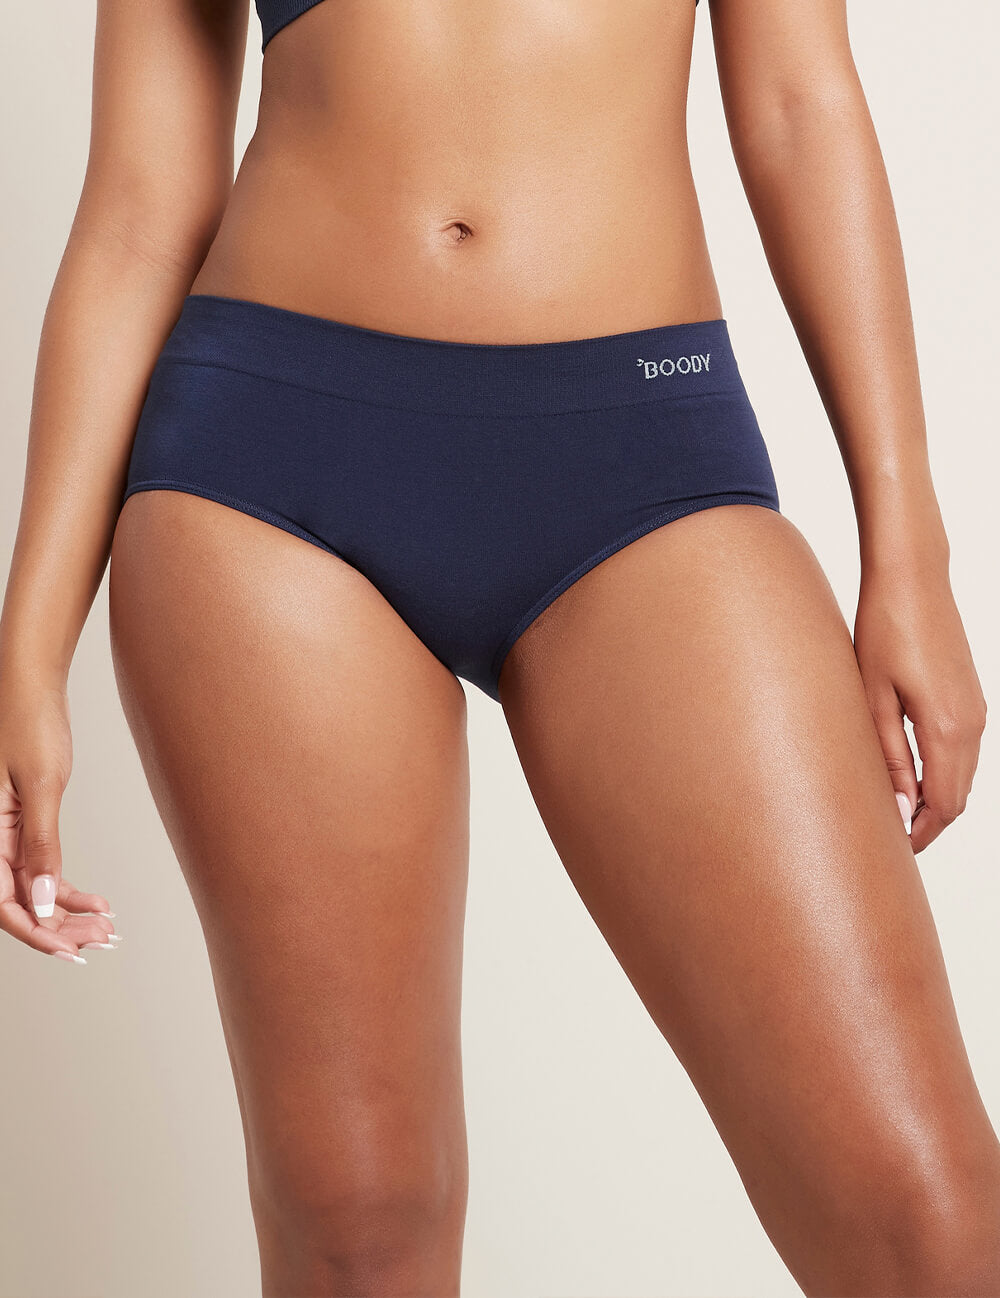 Midi knickers in navy blue Invisible Elegance